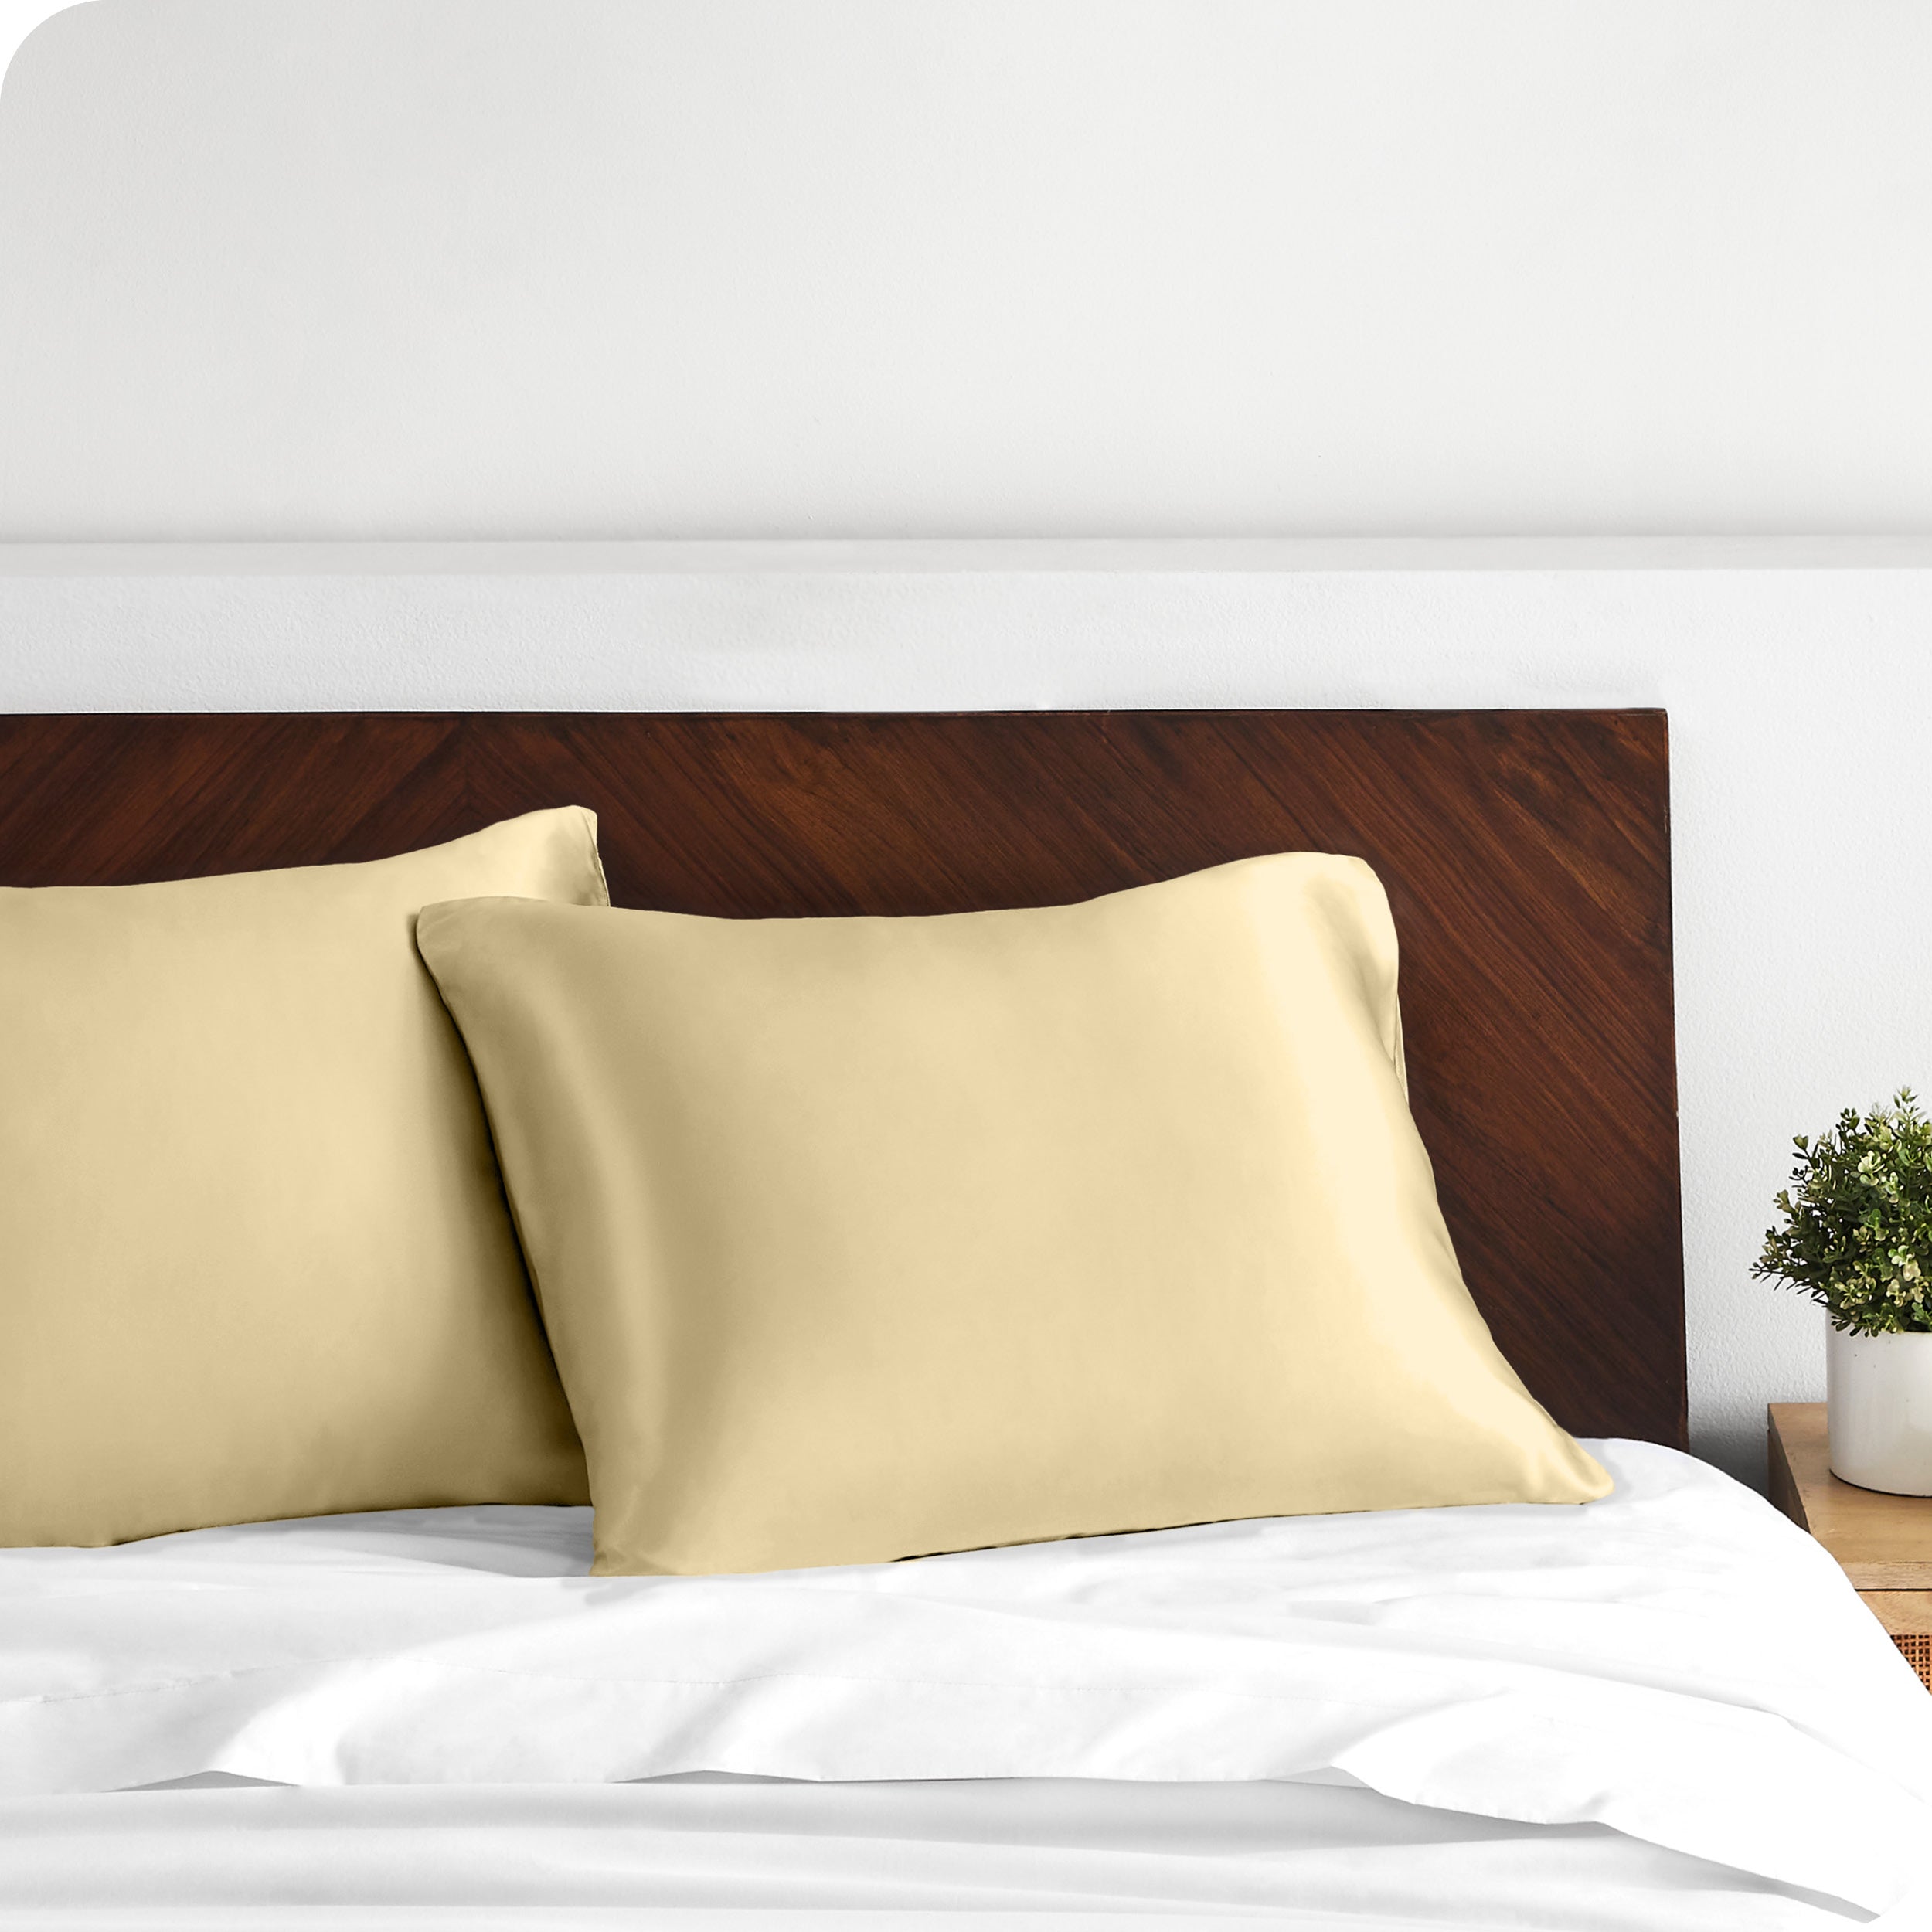 Two satin pillowcases on pillows against a wooden headboard